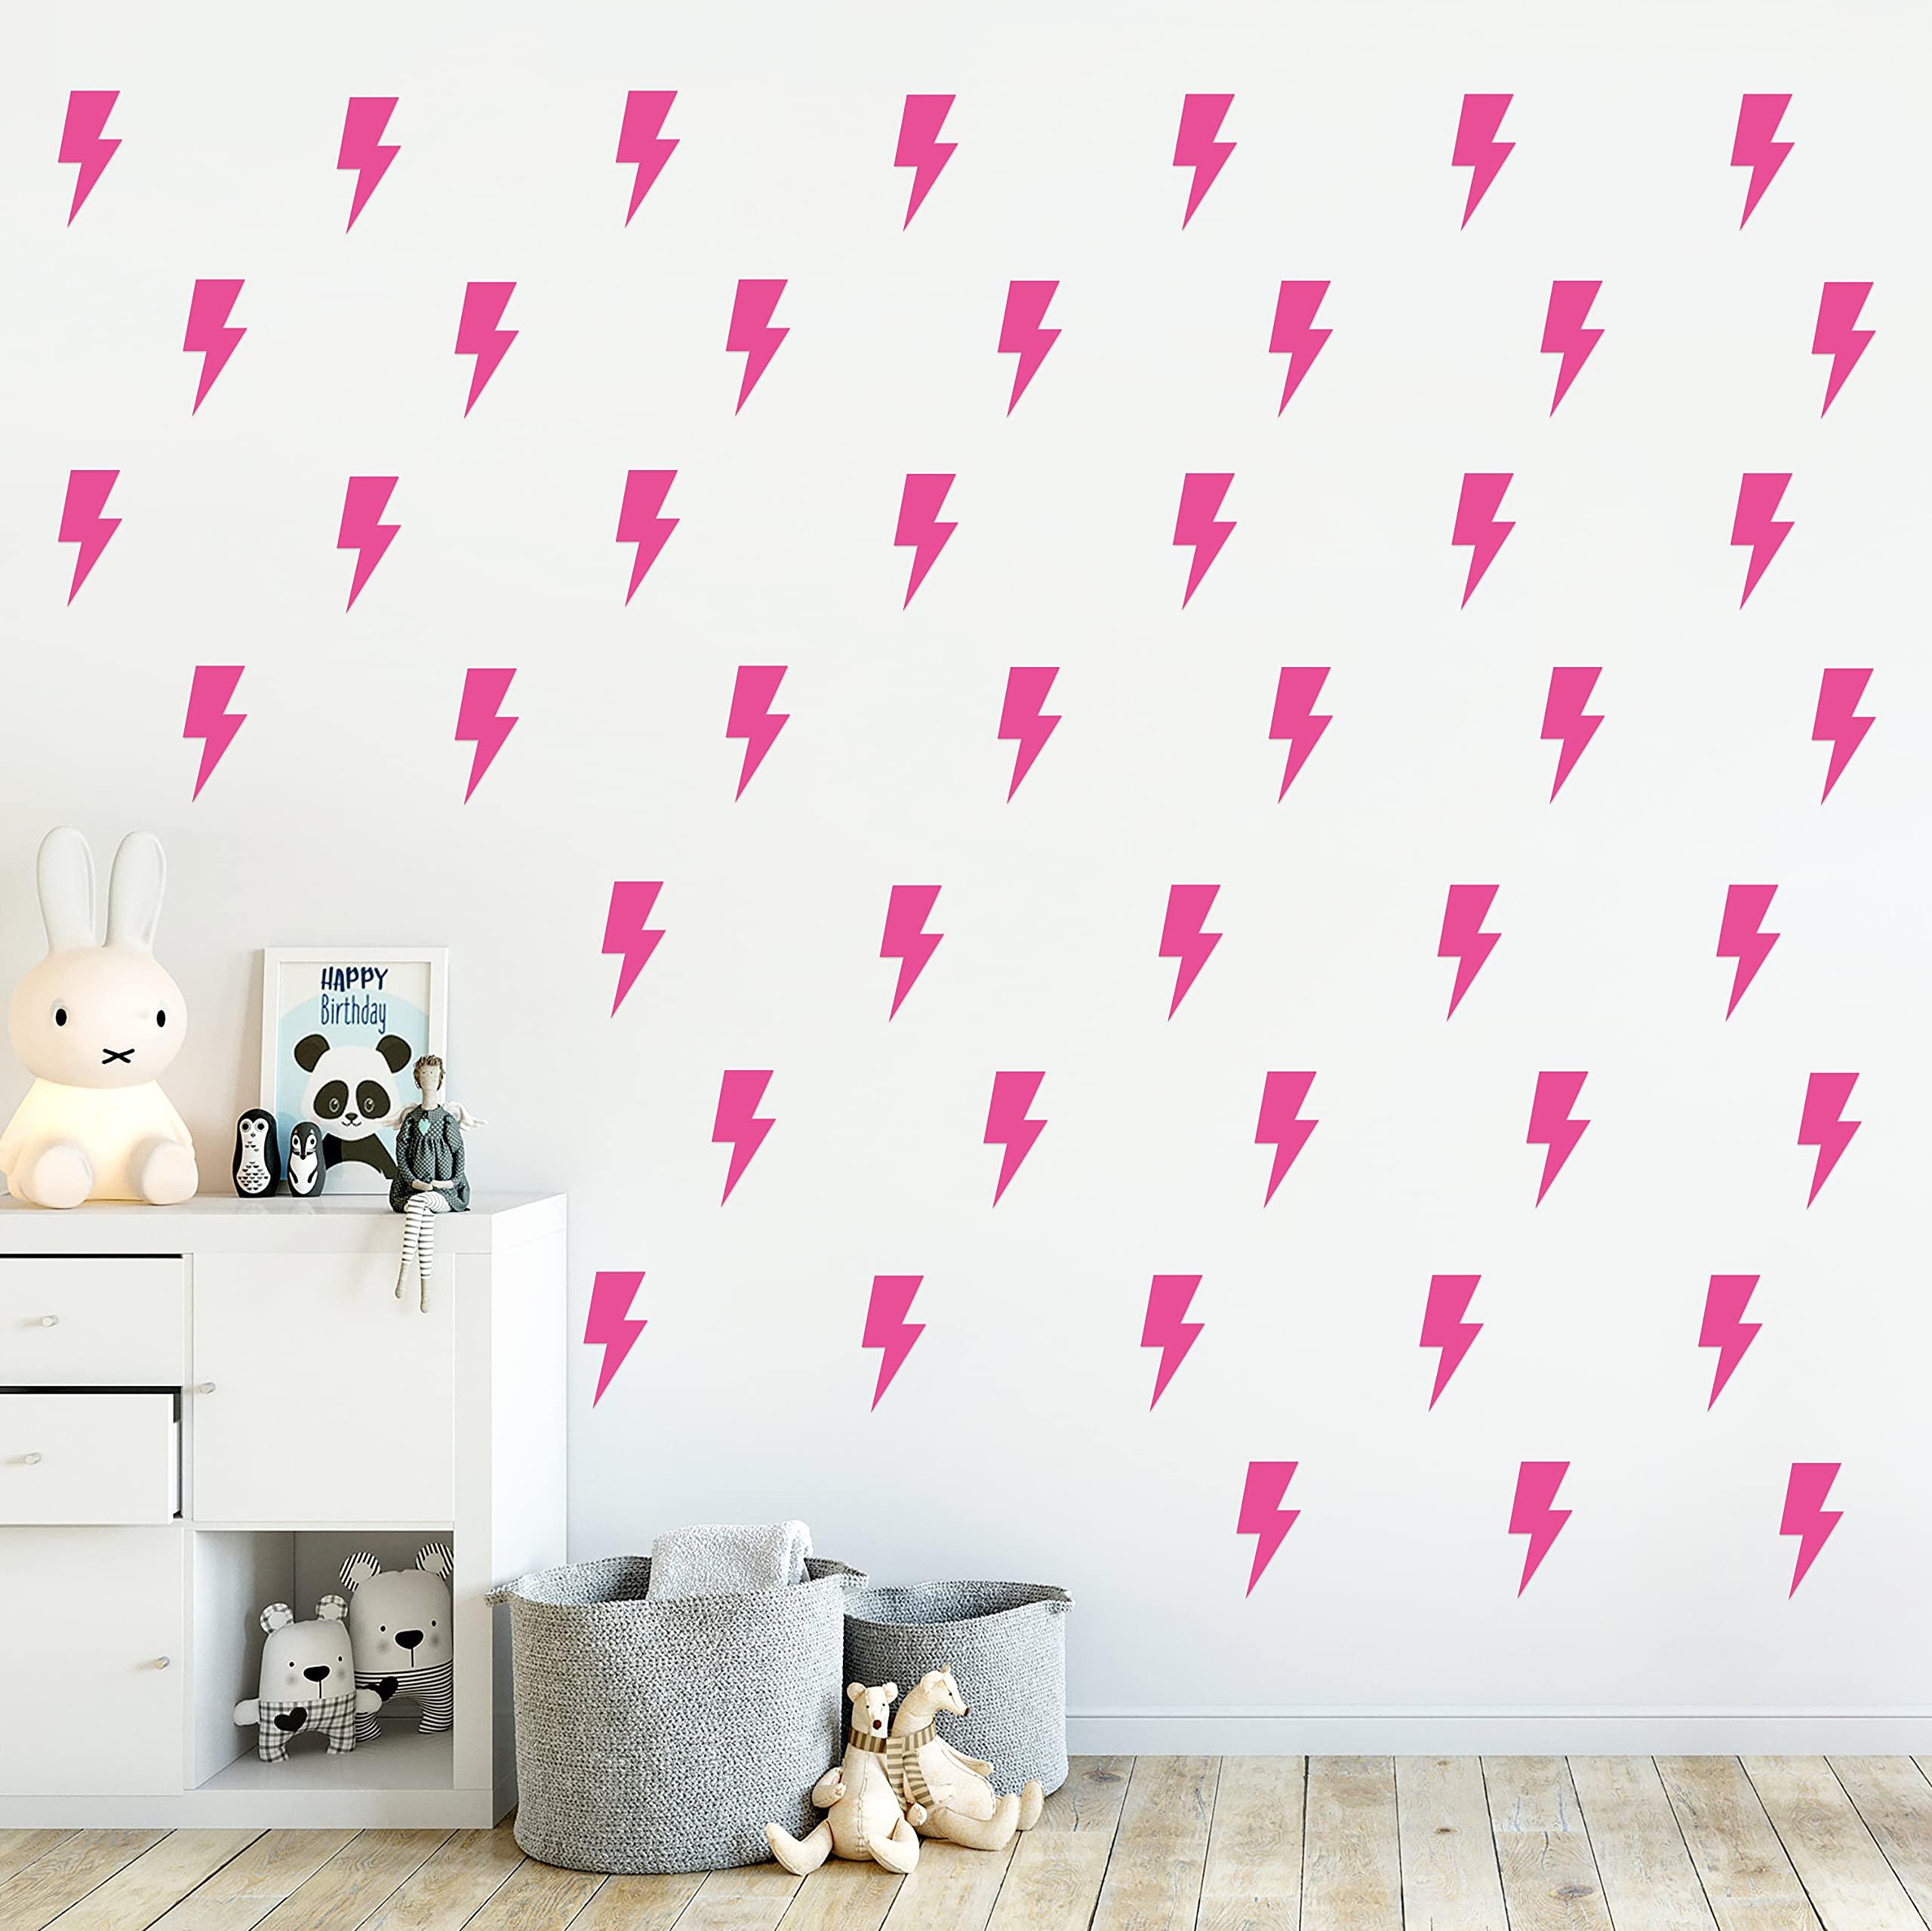 Amazoncom A1diee Set of 96 Lightning Bolt Wall Decal Preppy Pink